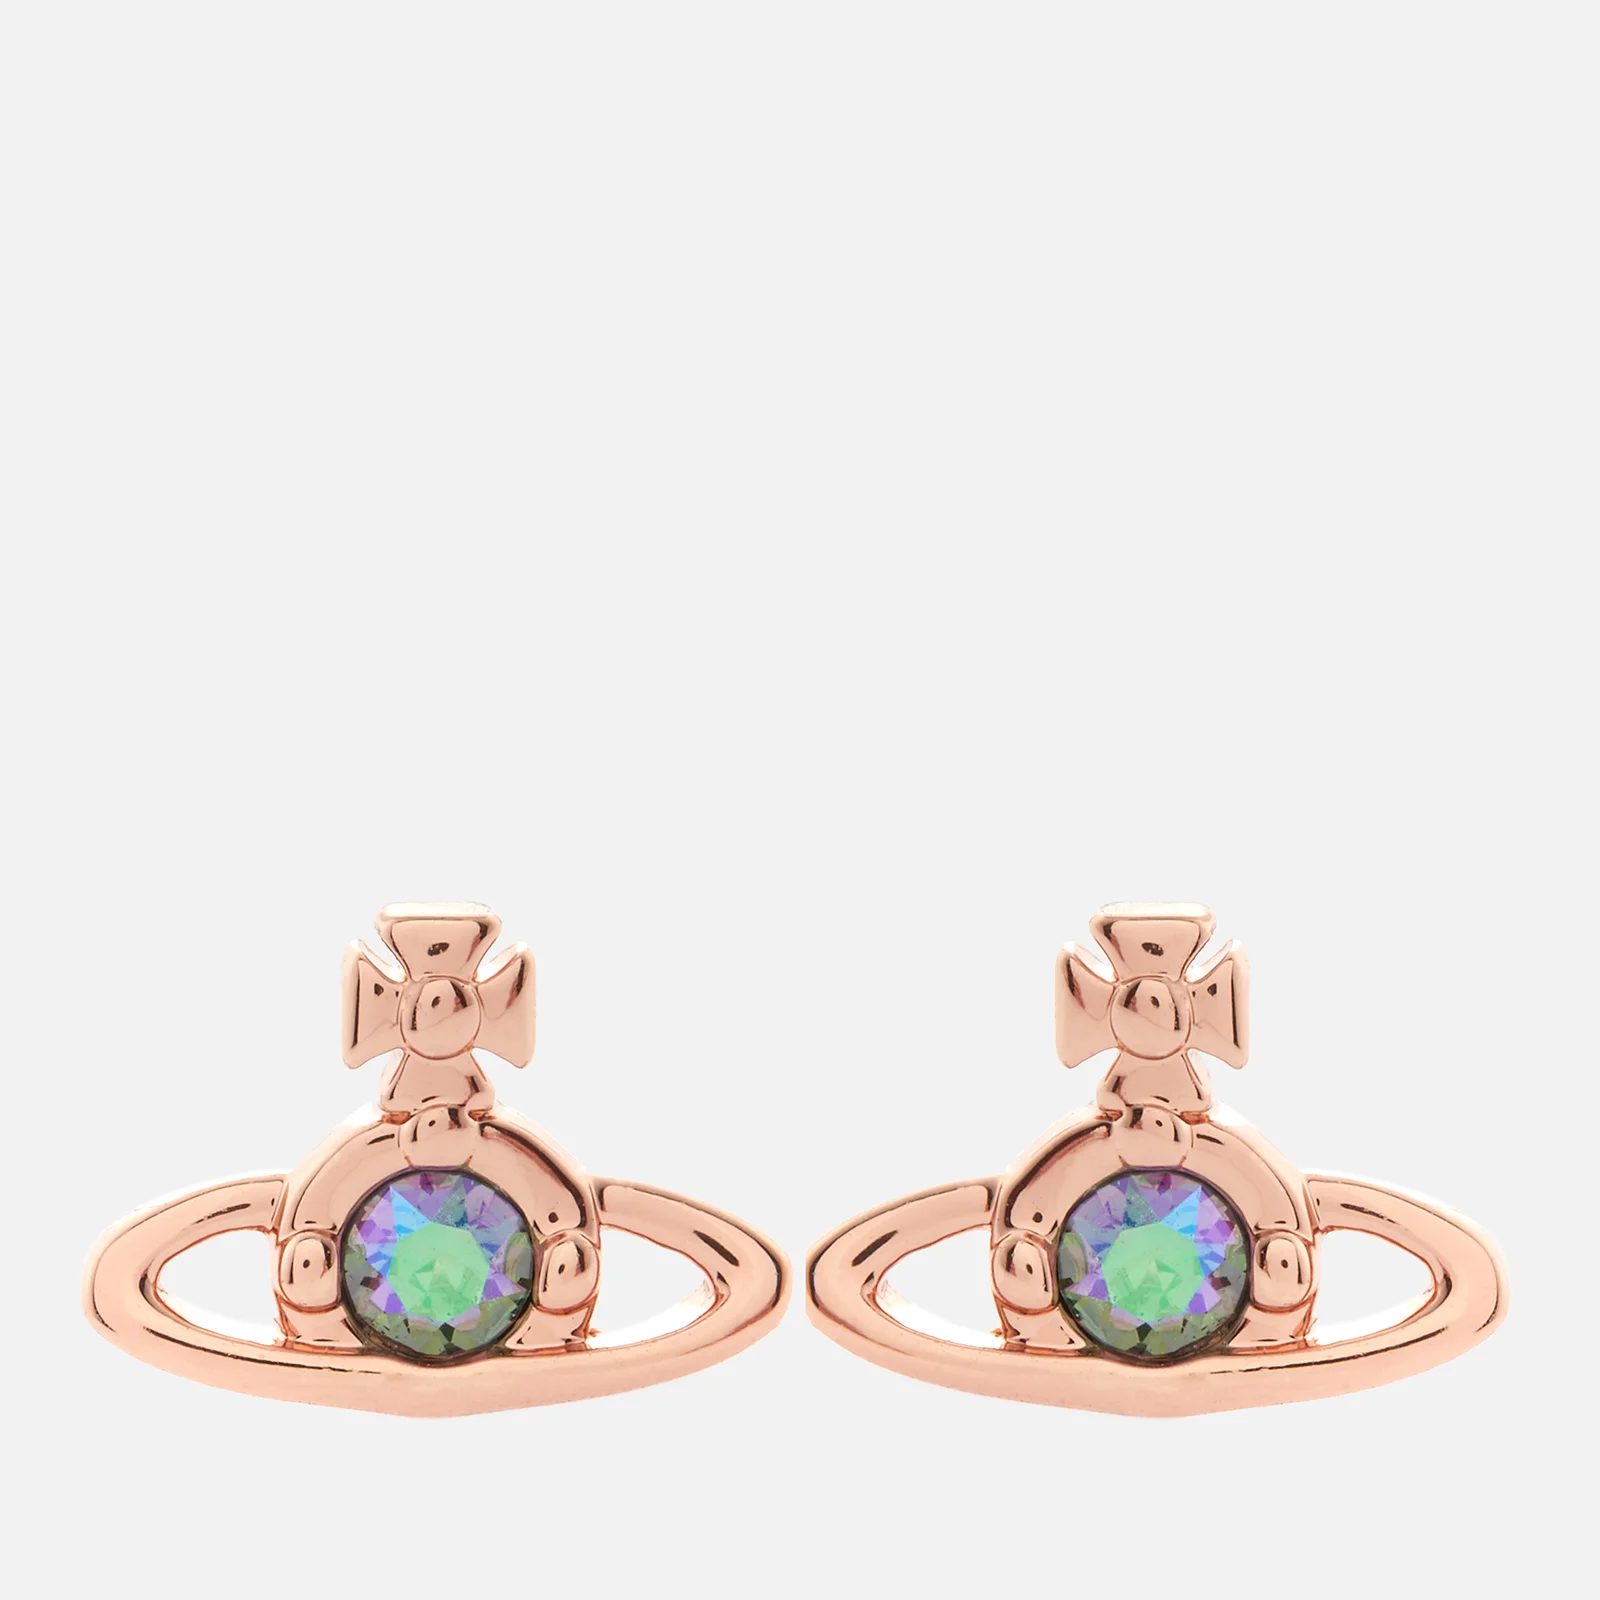 Vivienne Westwood Women's Nano Solitaire Earrings - Pink Gold Paradise Shine Image 1